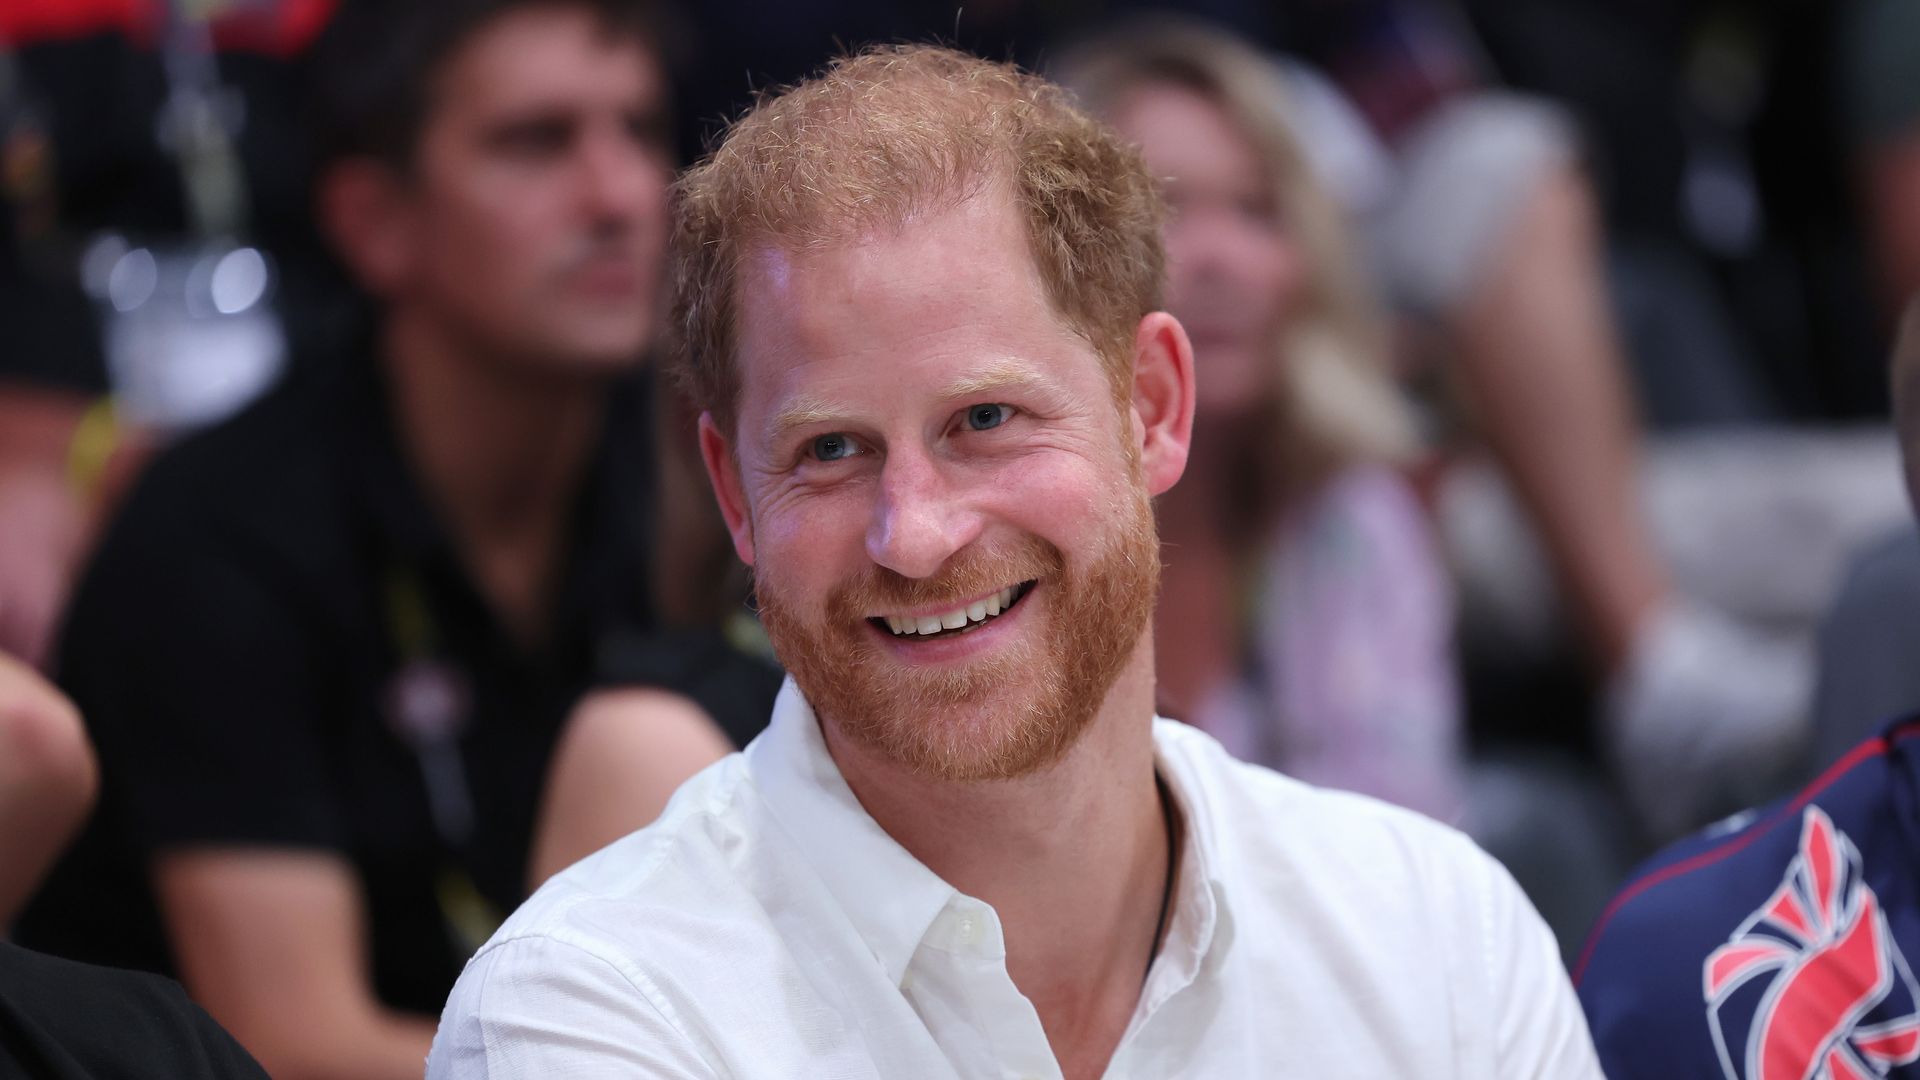 Prince Harry smiling in at the Invictus Games 